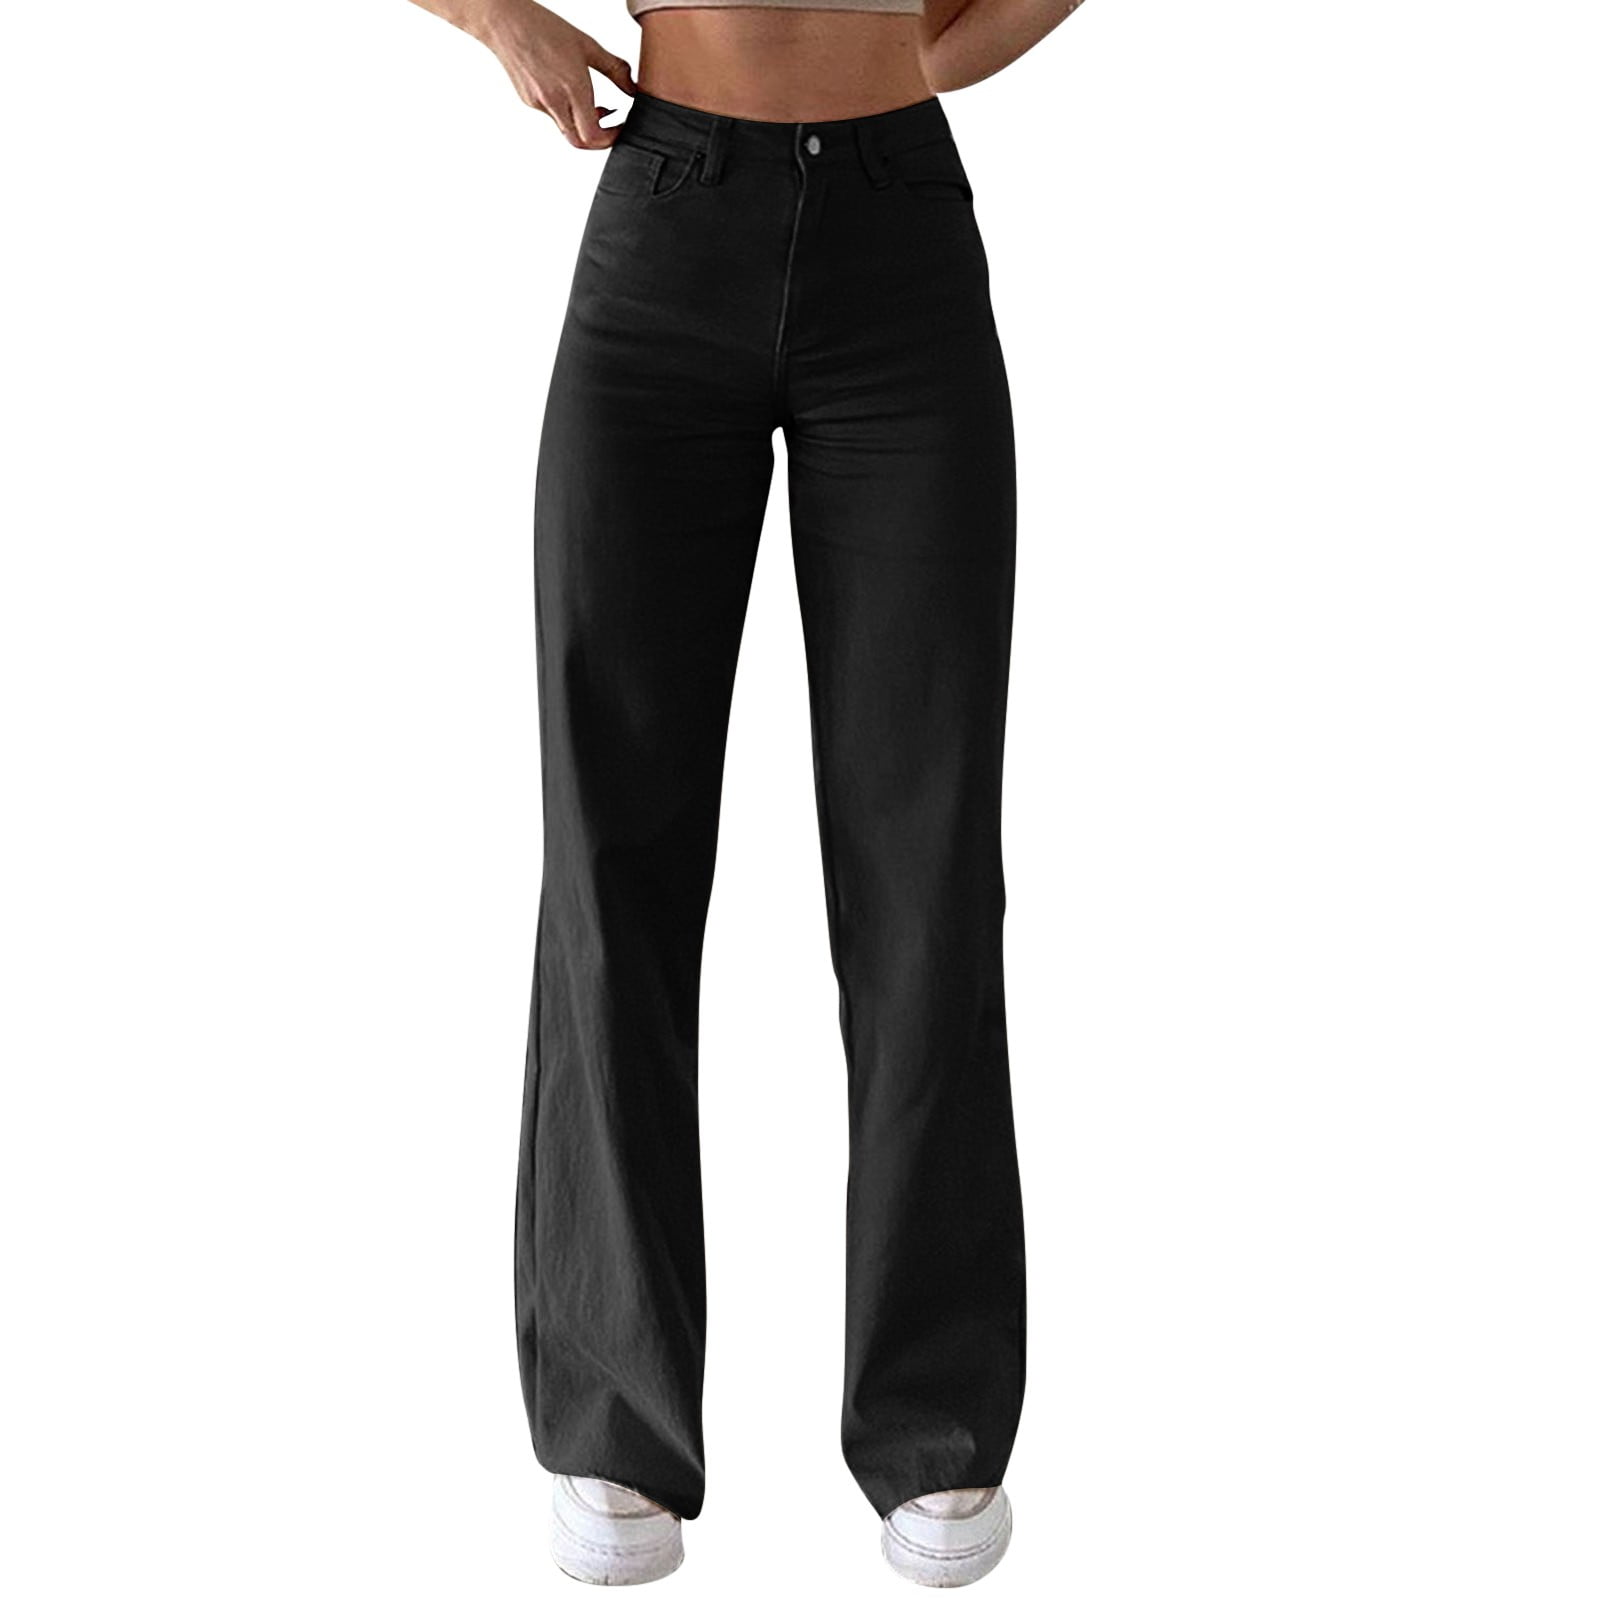 Professional Suit Pants Women Straight Black Work Pants Spring and Autumn  Bank Hotel Skinny Pants Loose Drooping Casual Long Pants